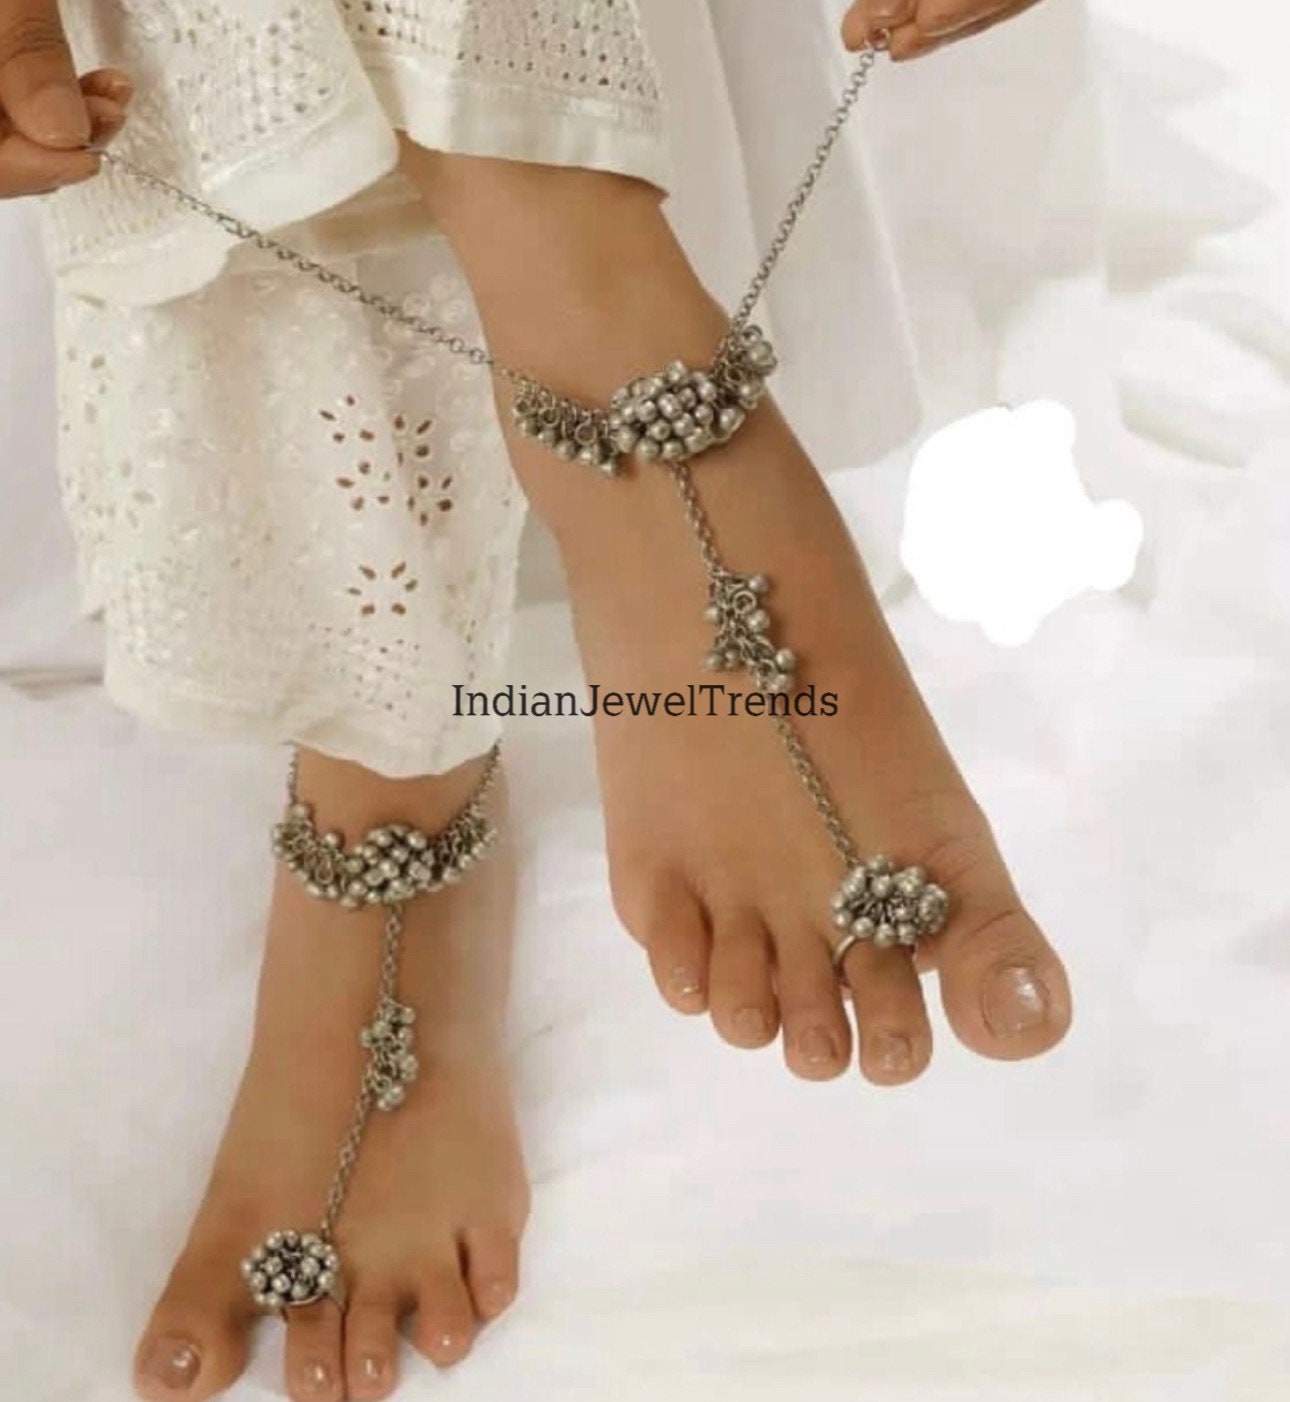 Toe Ring Barefoot Crystals toe ring attched Squiggel Anklet HOT | eBay